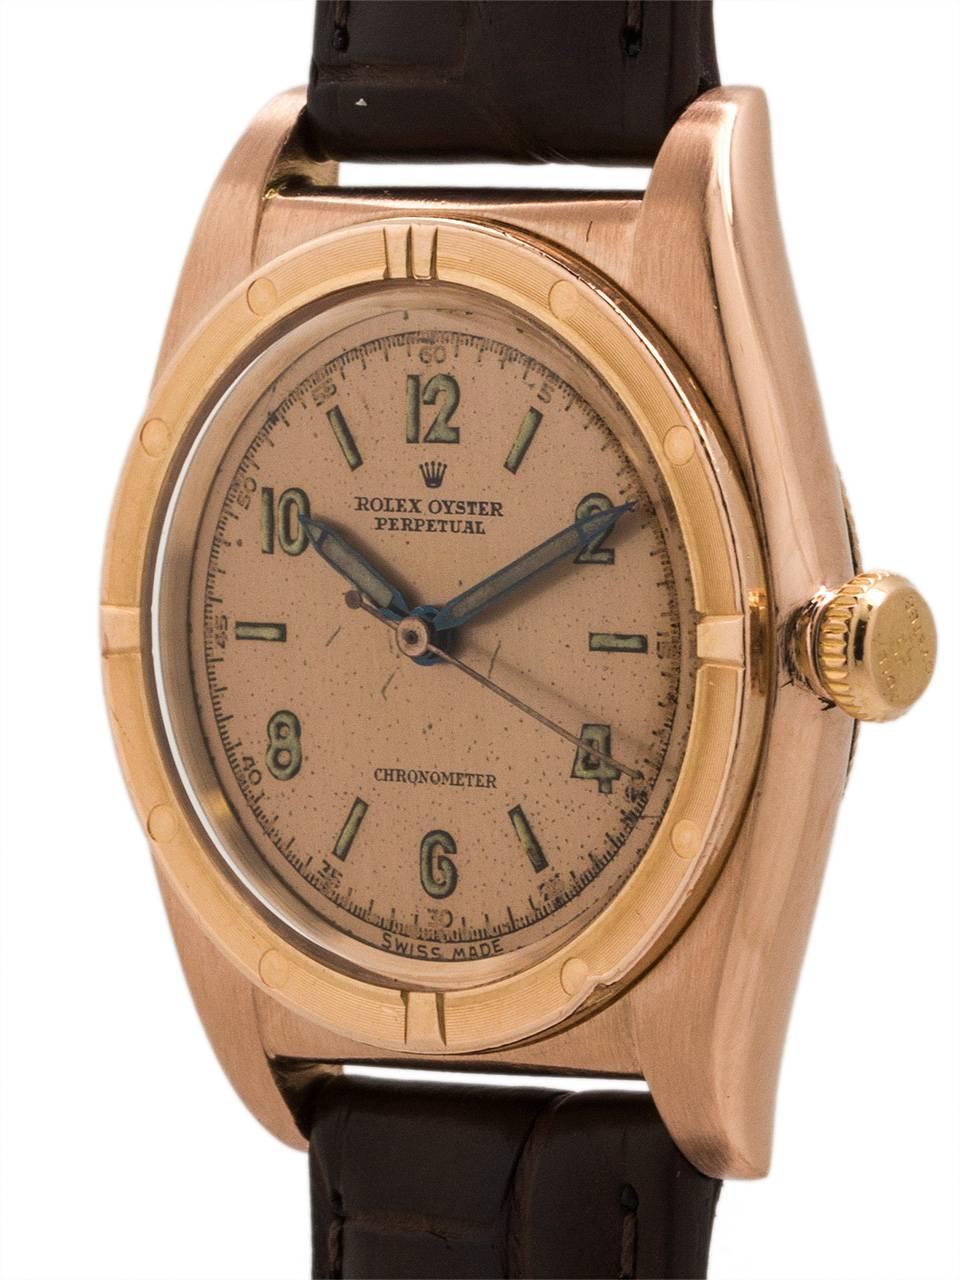 
A Christmas present from 69 years ago, could be a Christmas present again! Rolex 14K PG Bubbleback ref 3372 serial # 495,xxx circa 1947. Featuring a 32mm diameter tonneau shaped Oyster case with fine engine turned bezel, acrylic crystal, original